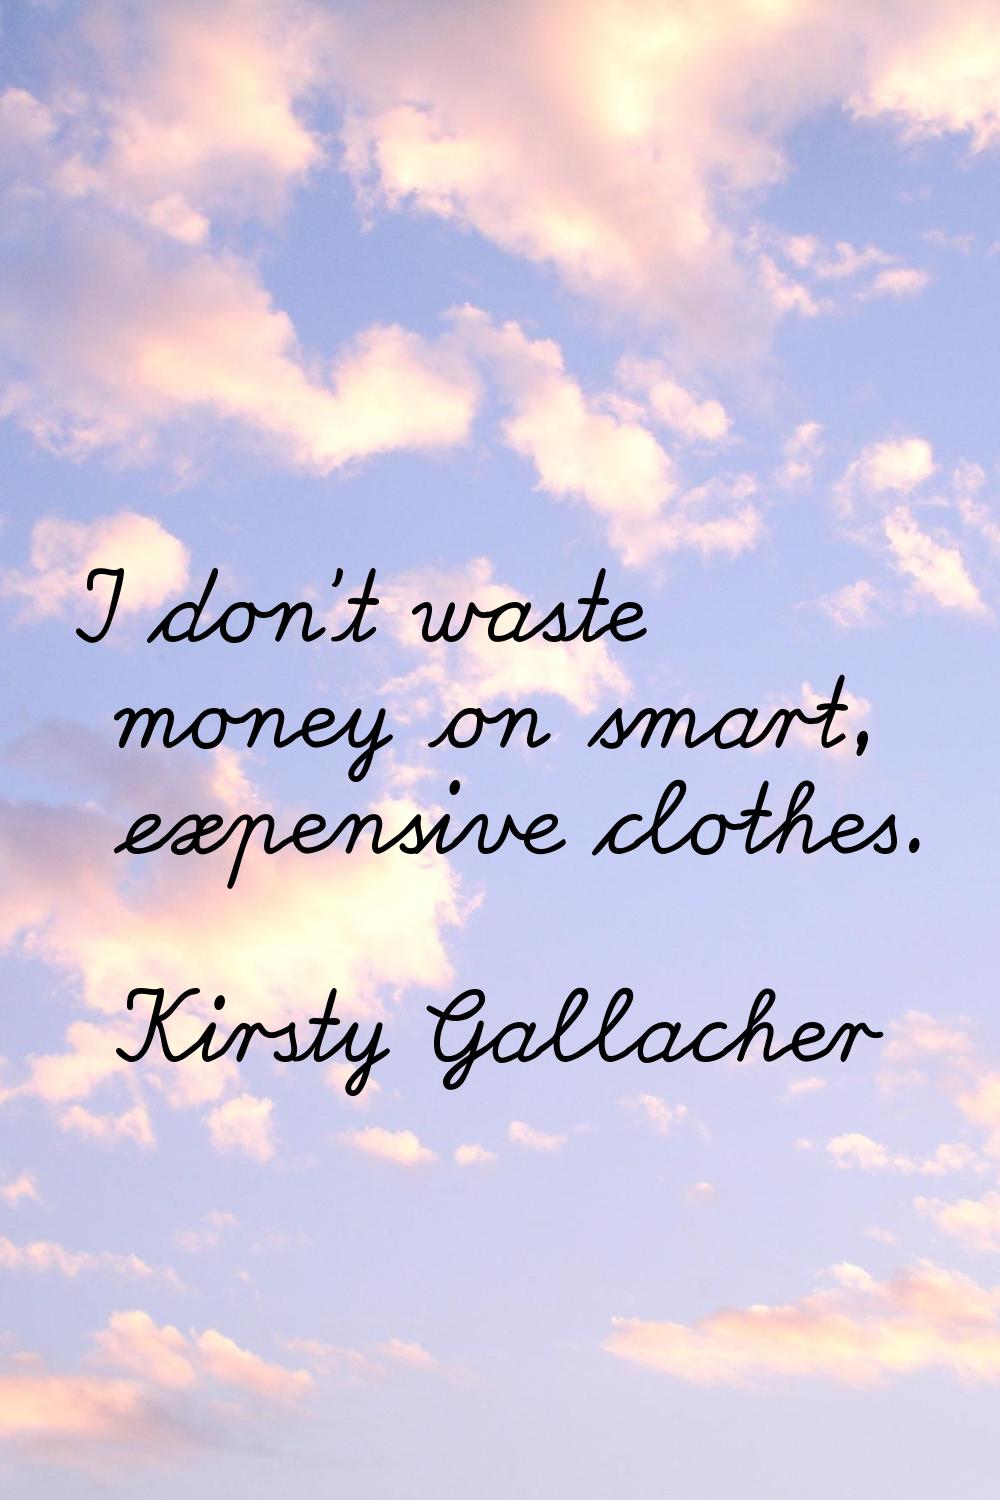 I don't waste money on smart, expensive clothes.